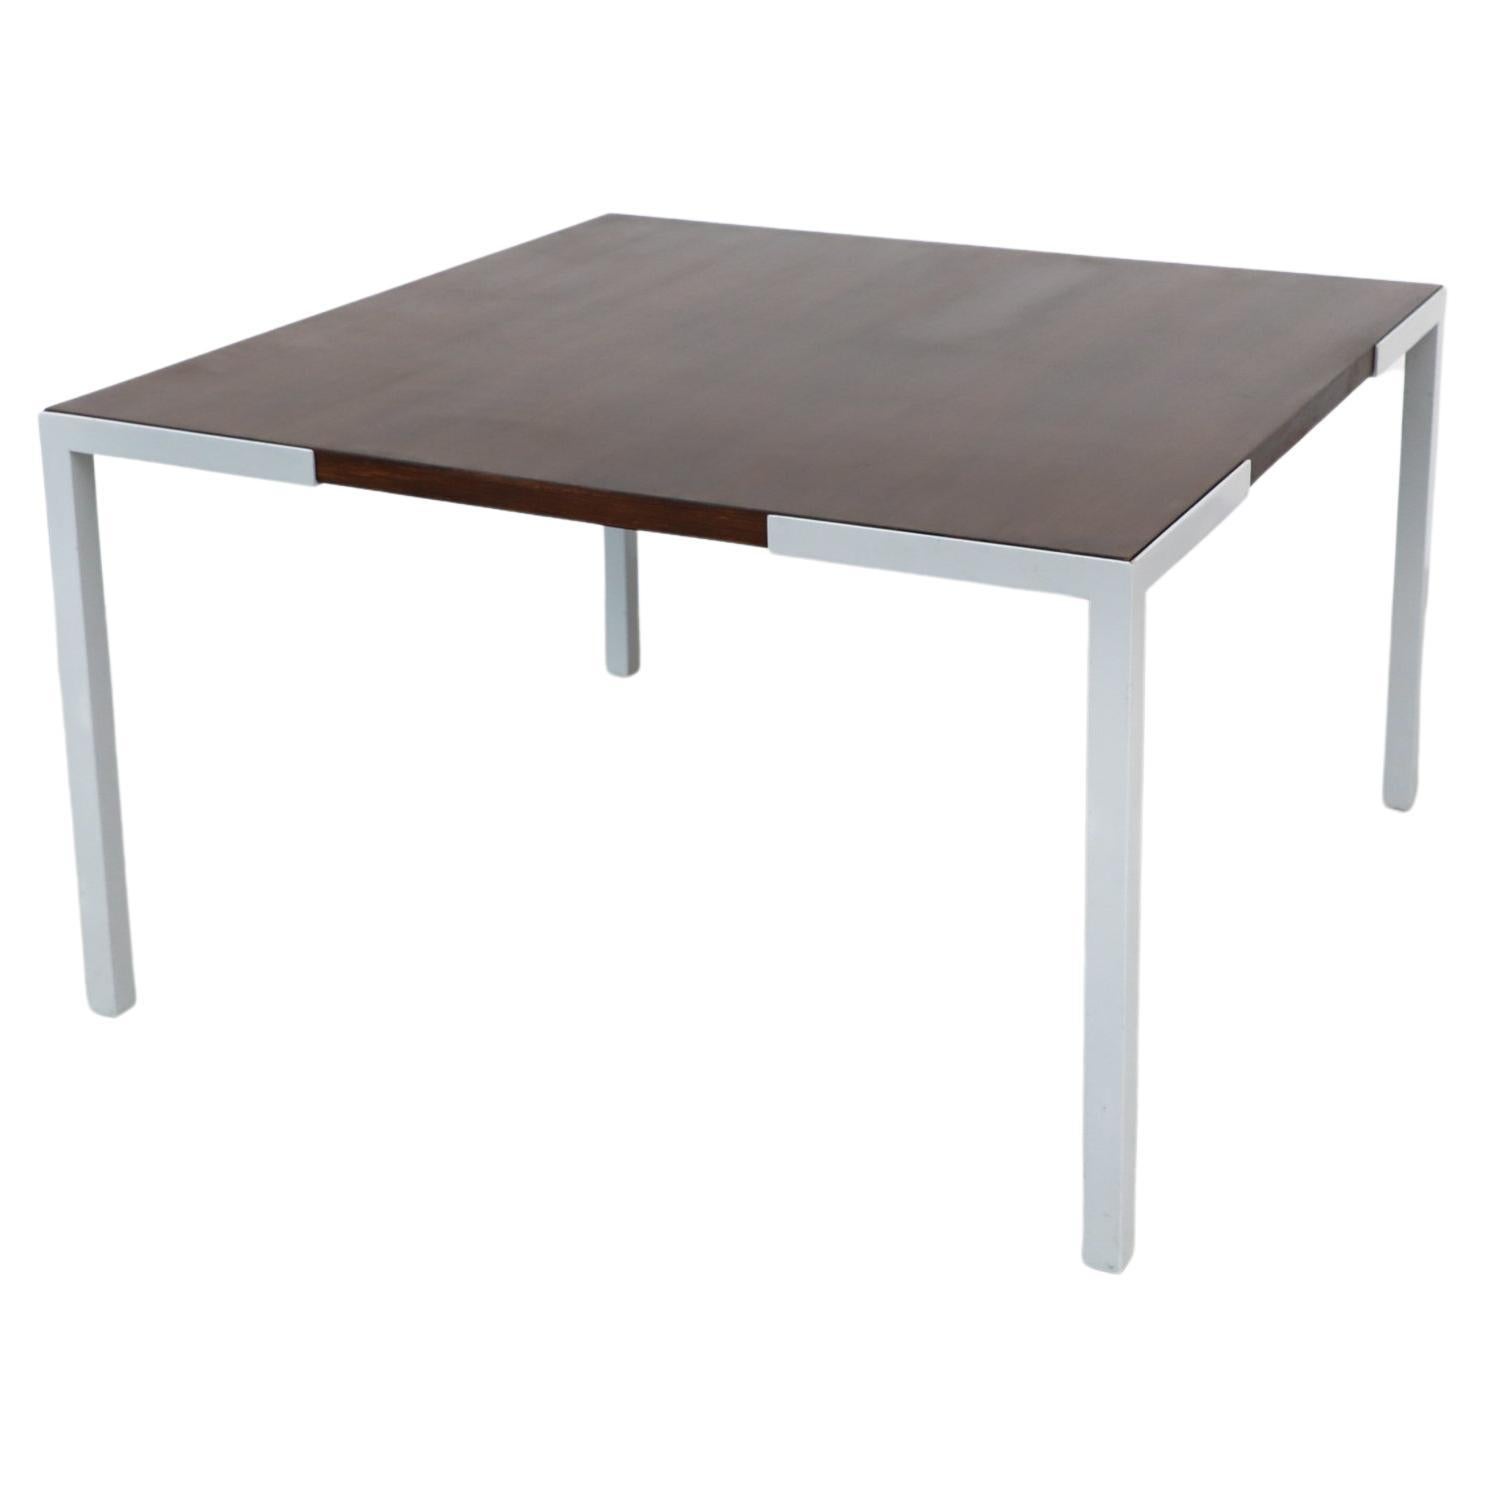 Wim den Boon Square Wenge and Light Gray Enameled Metal Dining Table